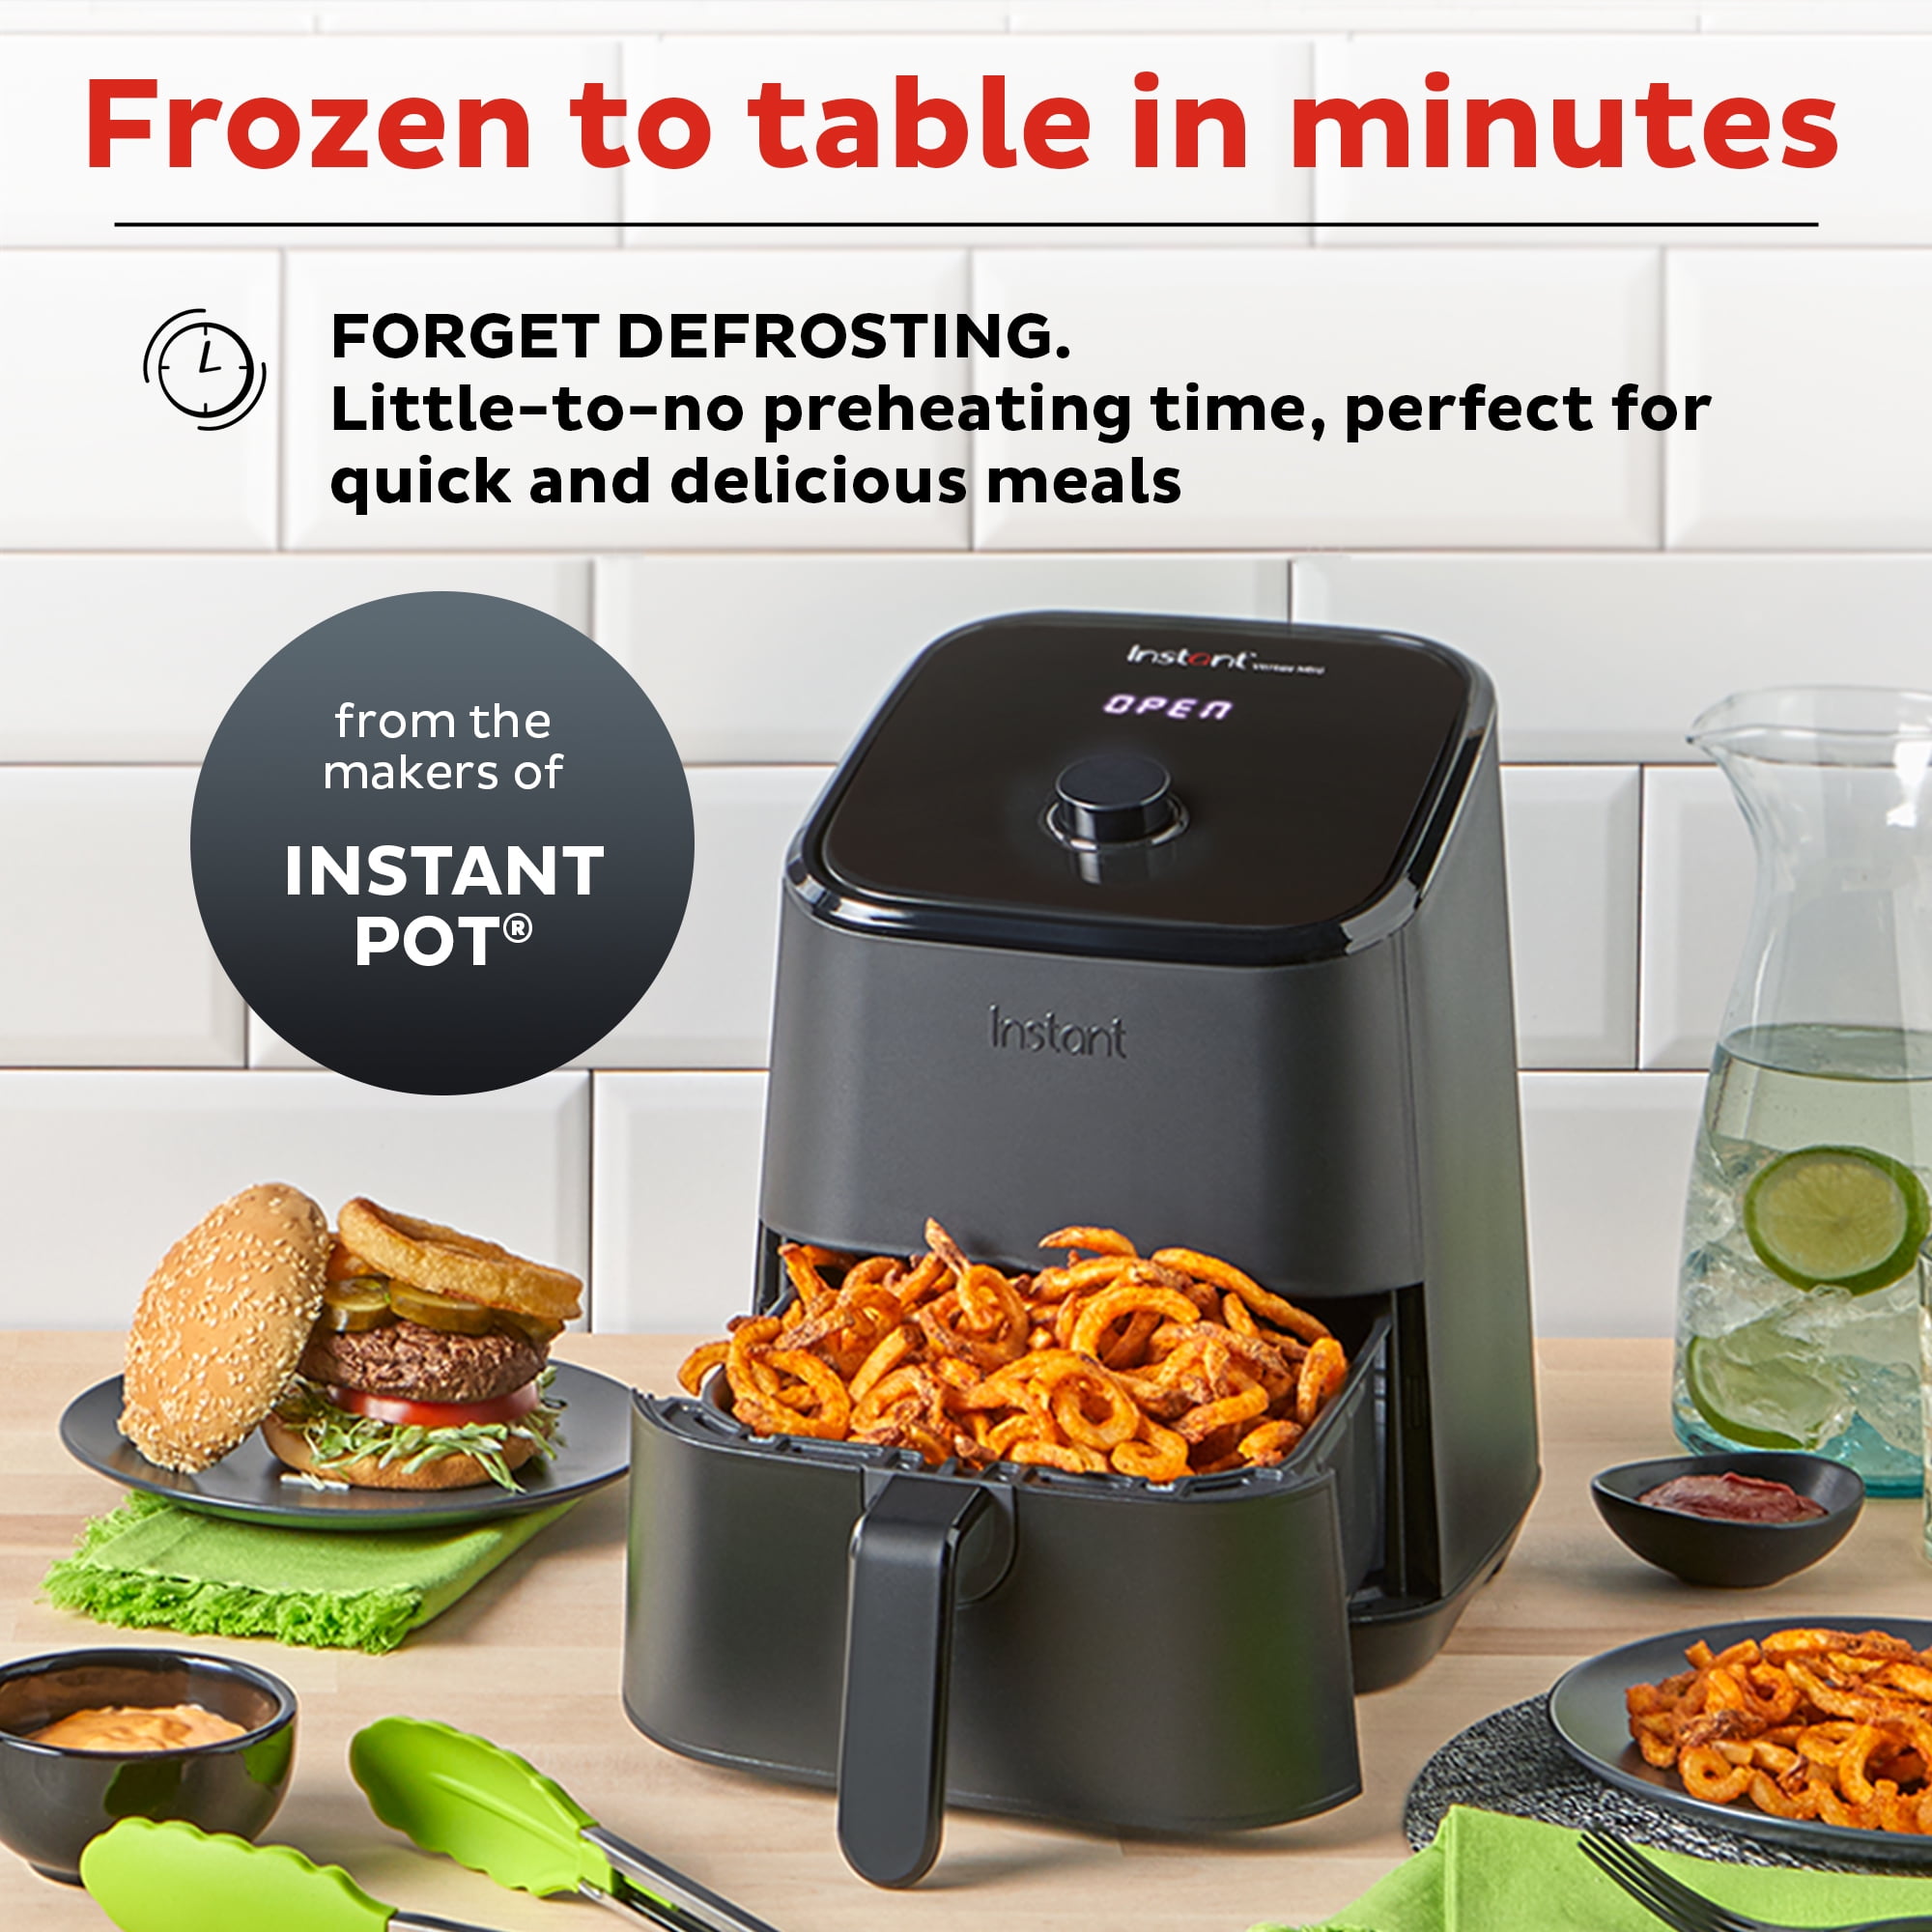  Instant Pot Vortex 4 Quart Air Fryer Oven,4-in-1 Functions,From  the Makers of Instant Pot,Customizable Smart Cooking Programs,Nonstick and  Dishwasher-Safe Basket,App With Over 100 Recipes : Home & Kitchen